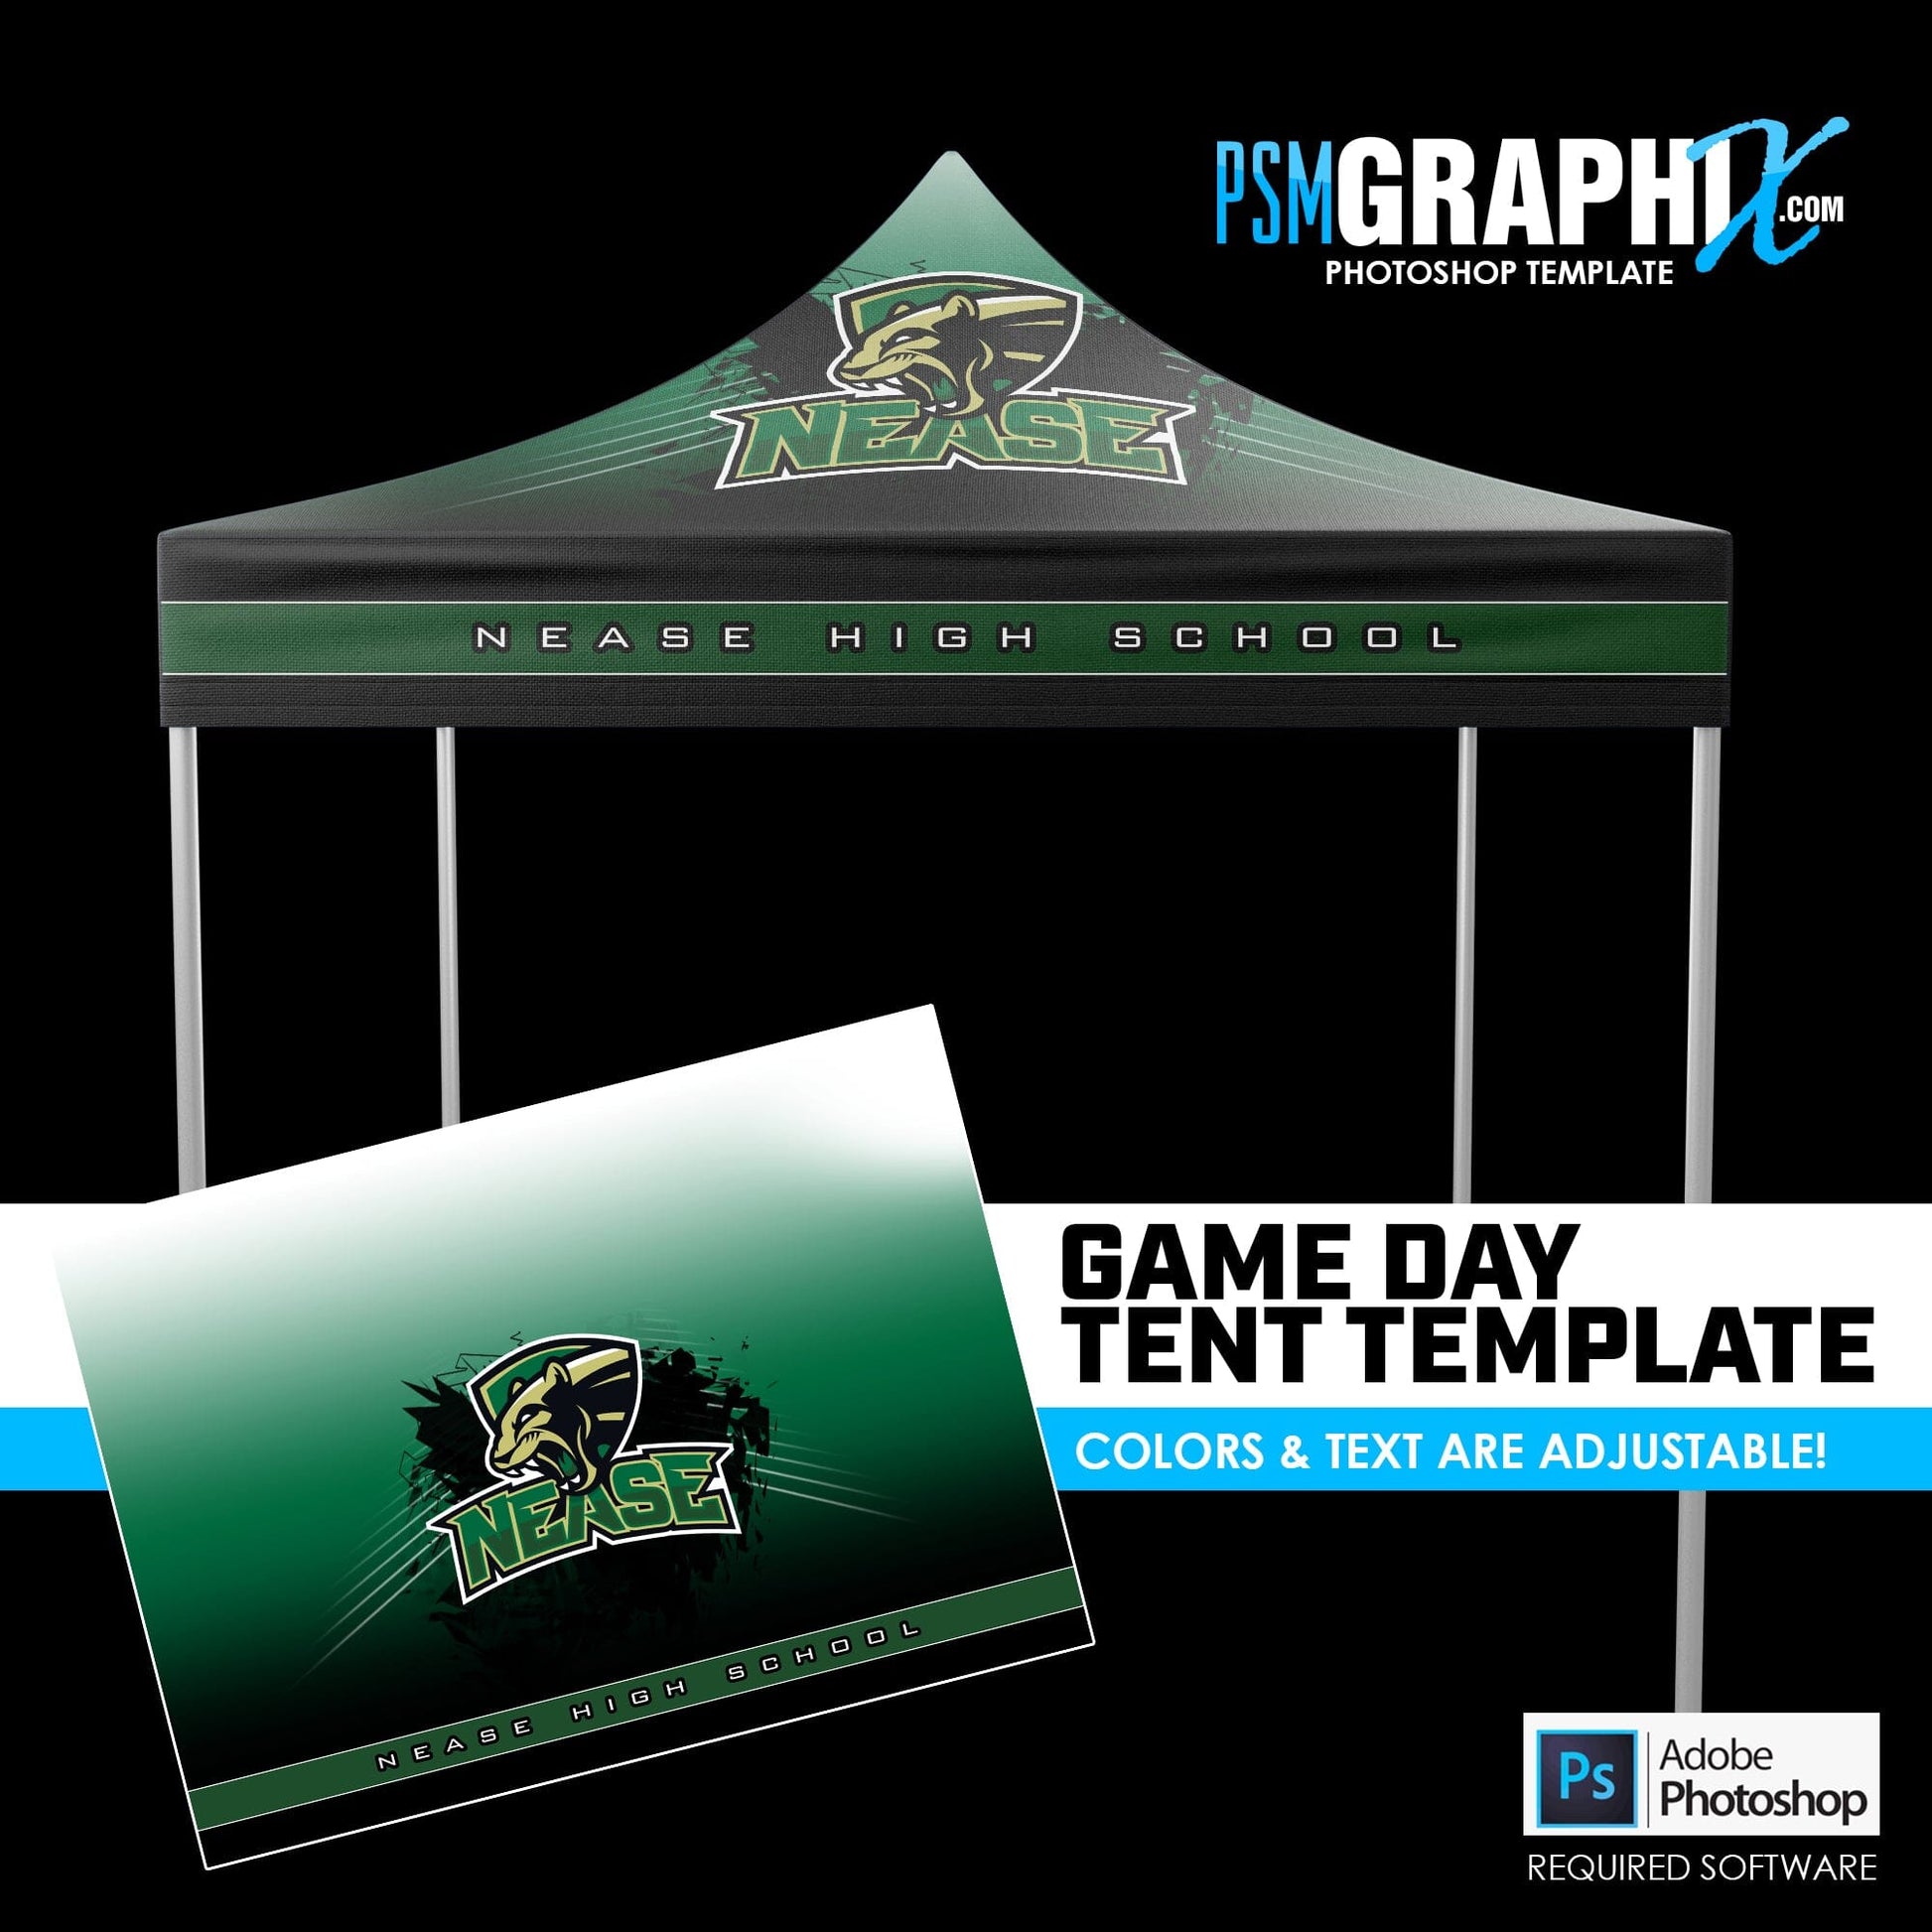 Breaker V.1 - Game Day Photoshop Tent Template-Photoshop Template - PSMGraphix